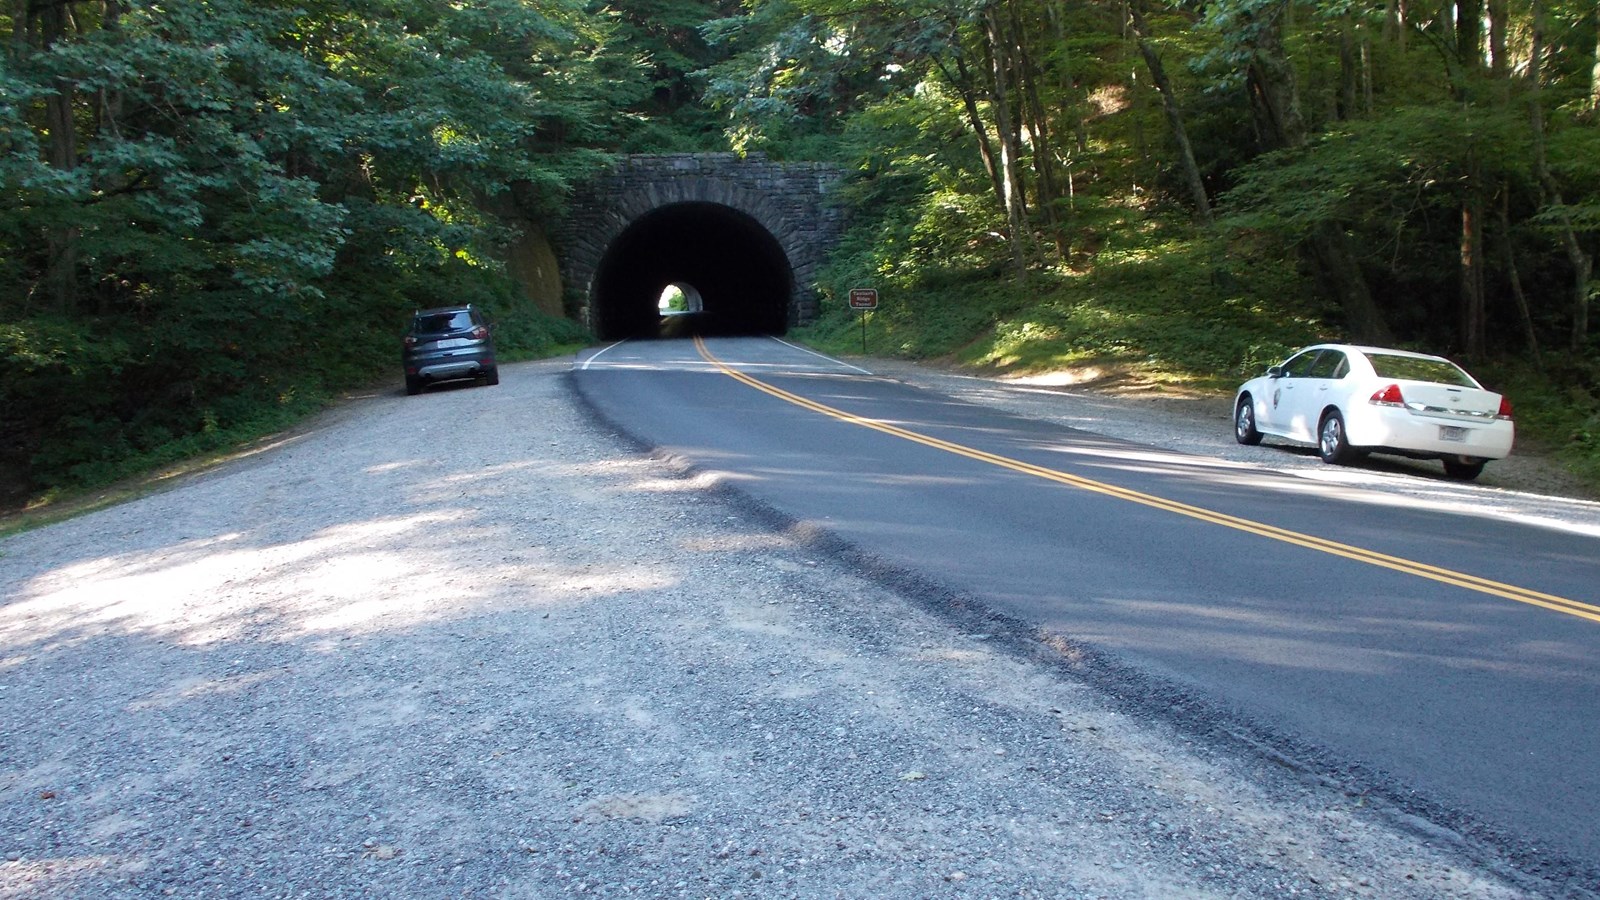 Dirt parking areas on both sides of the Parkway with Tanbark Ridge Tunnel in the background